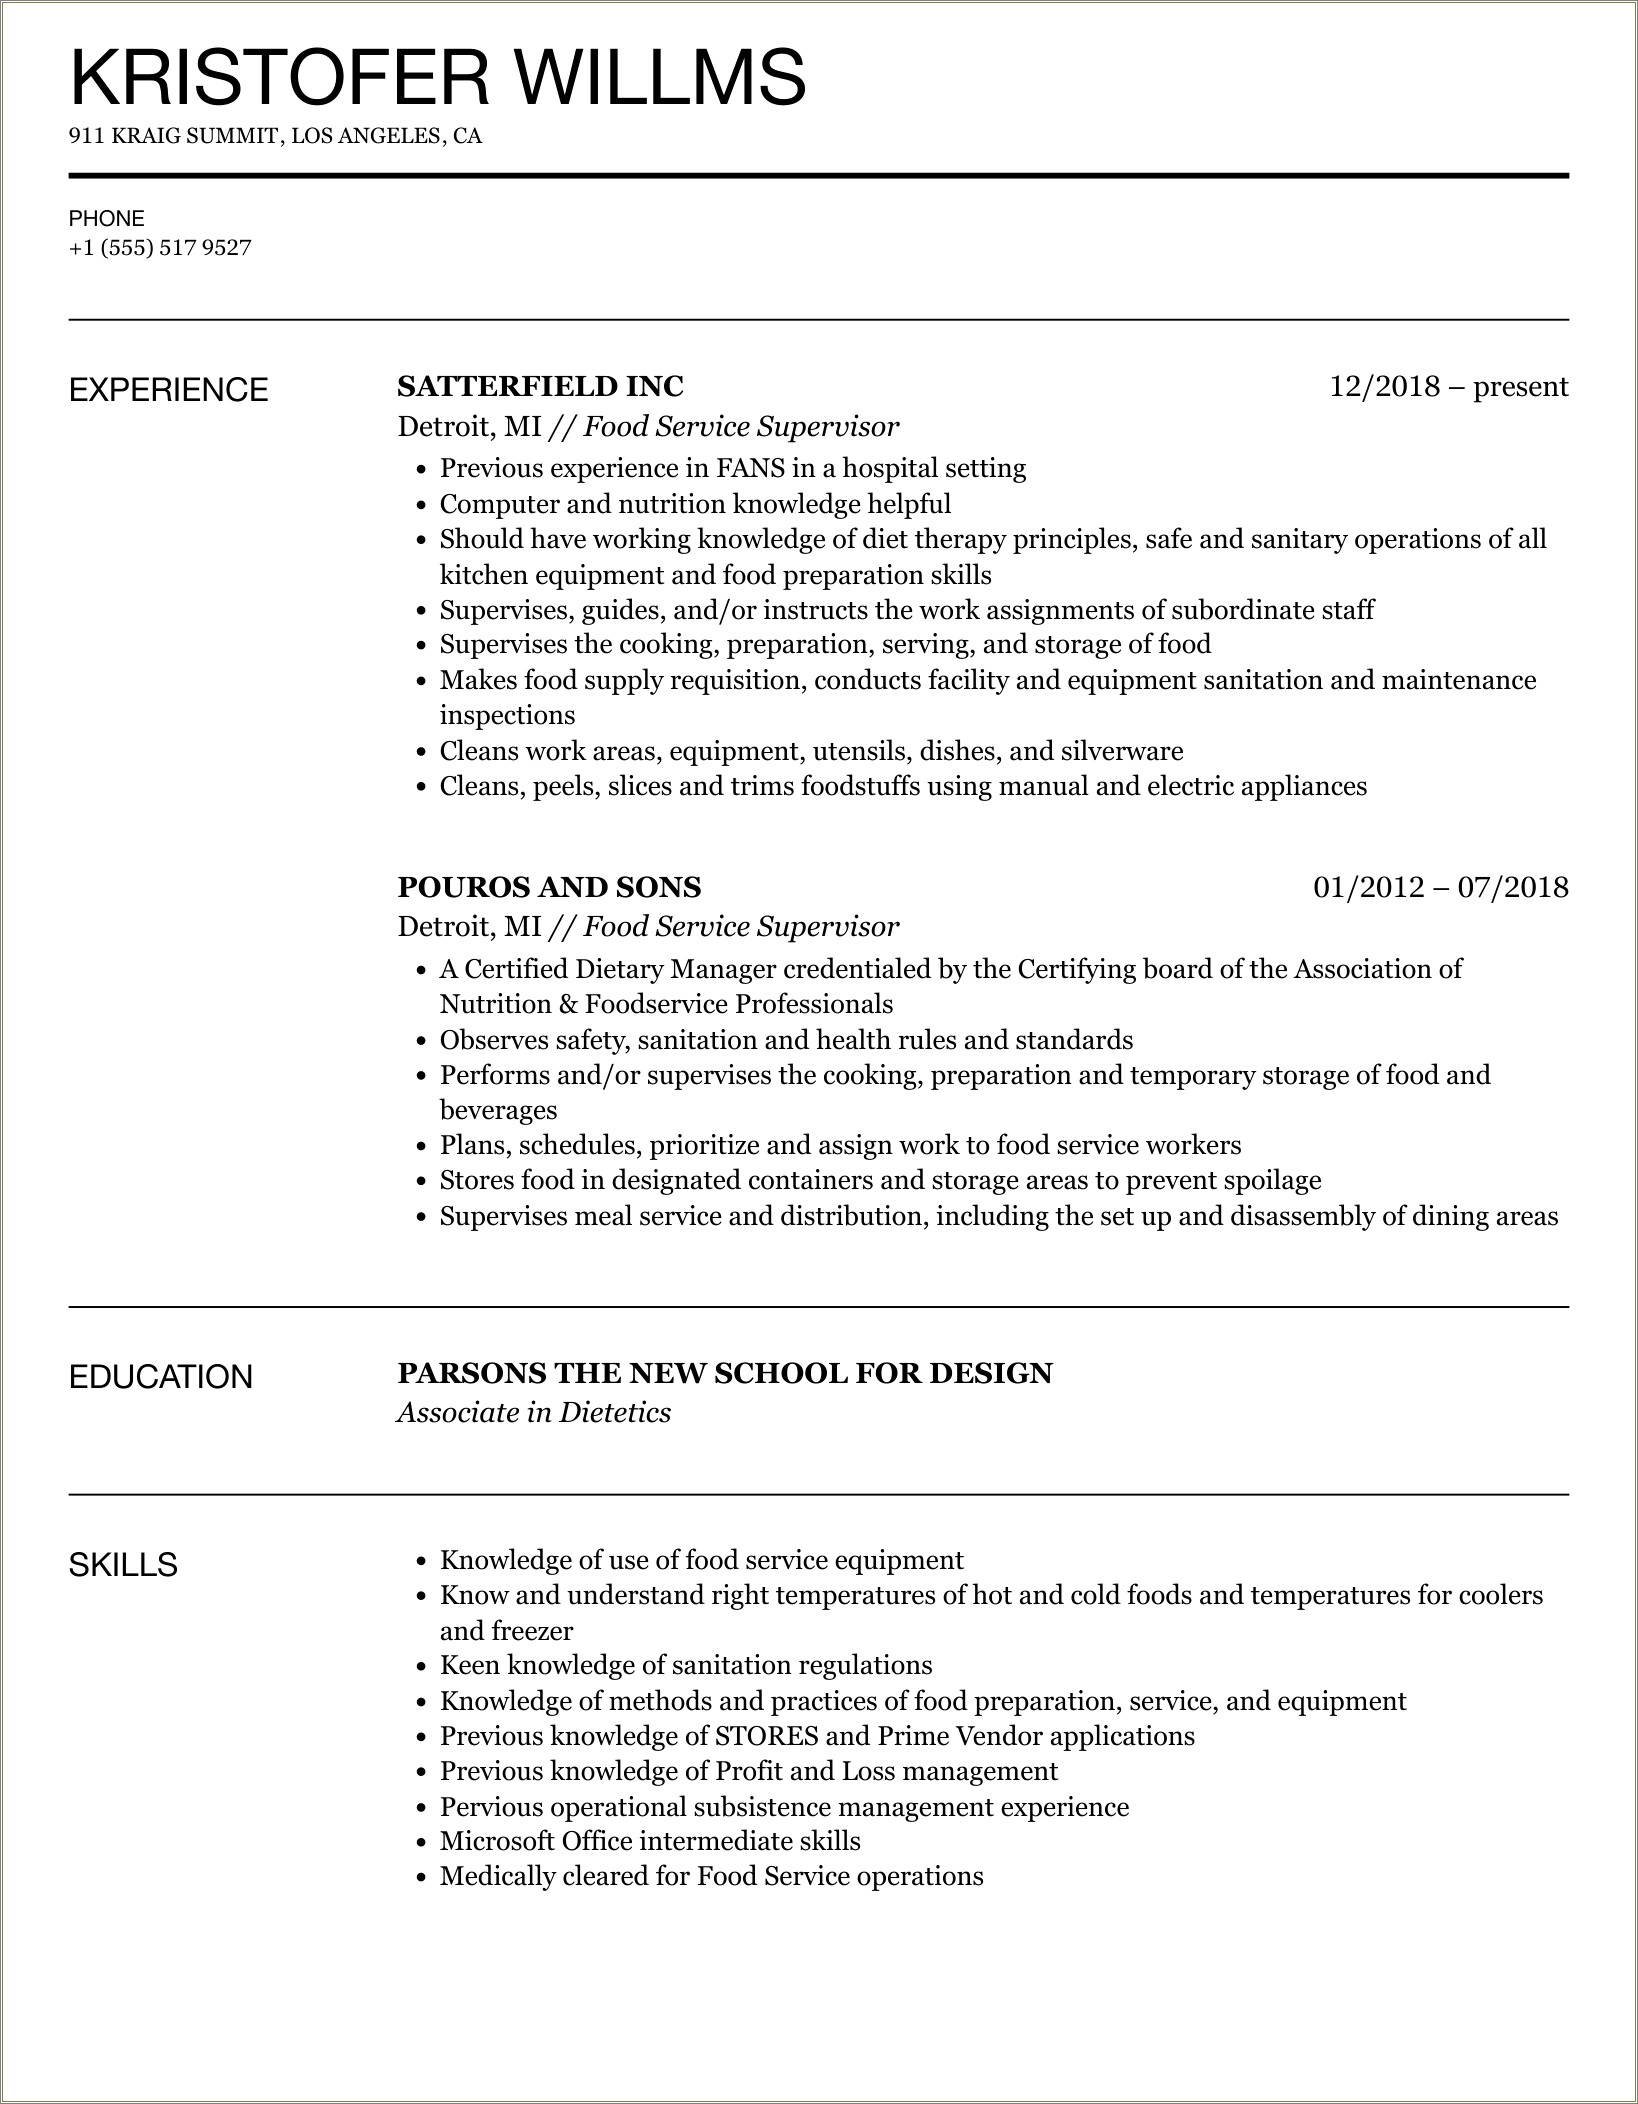 Resume For Working Student In Fast Food